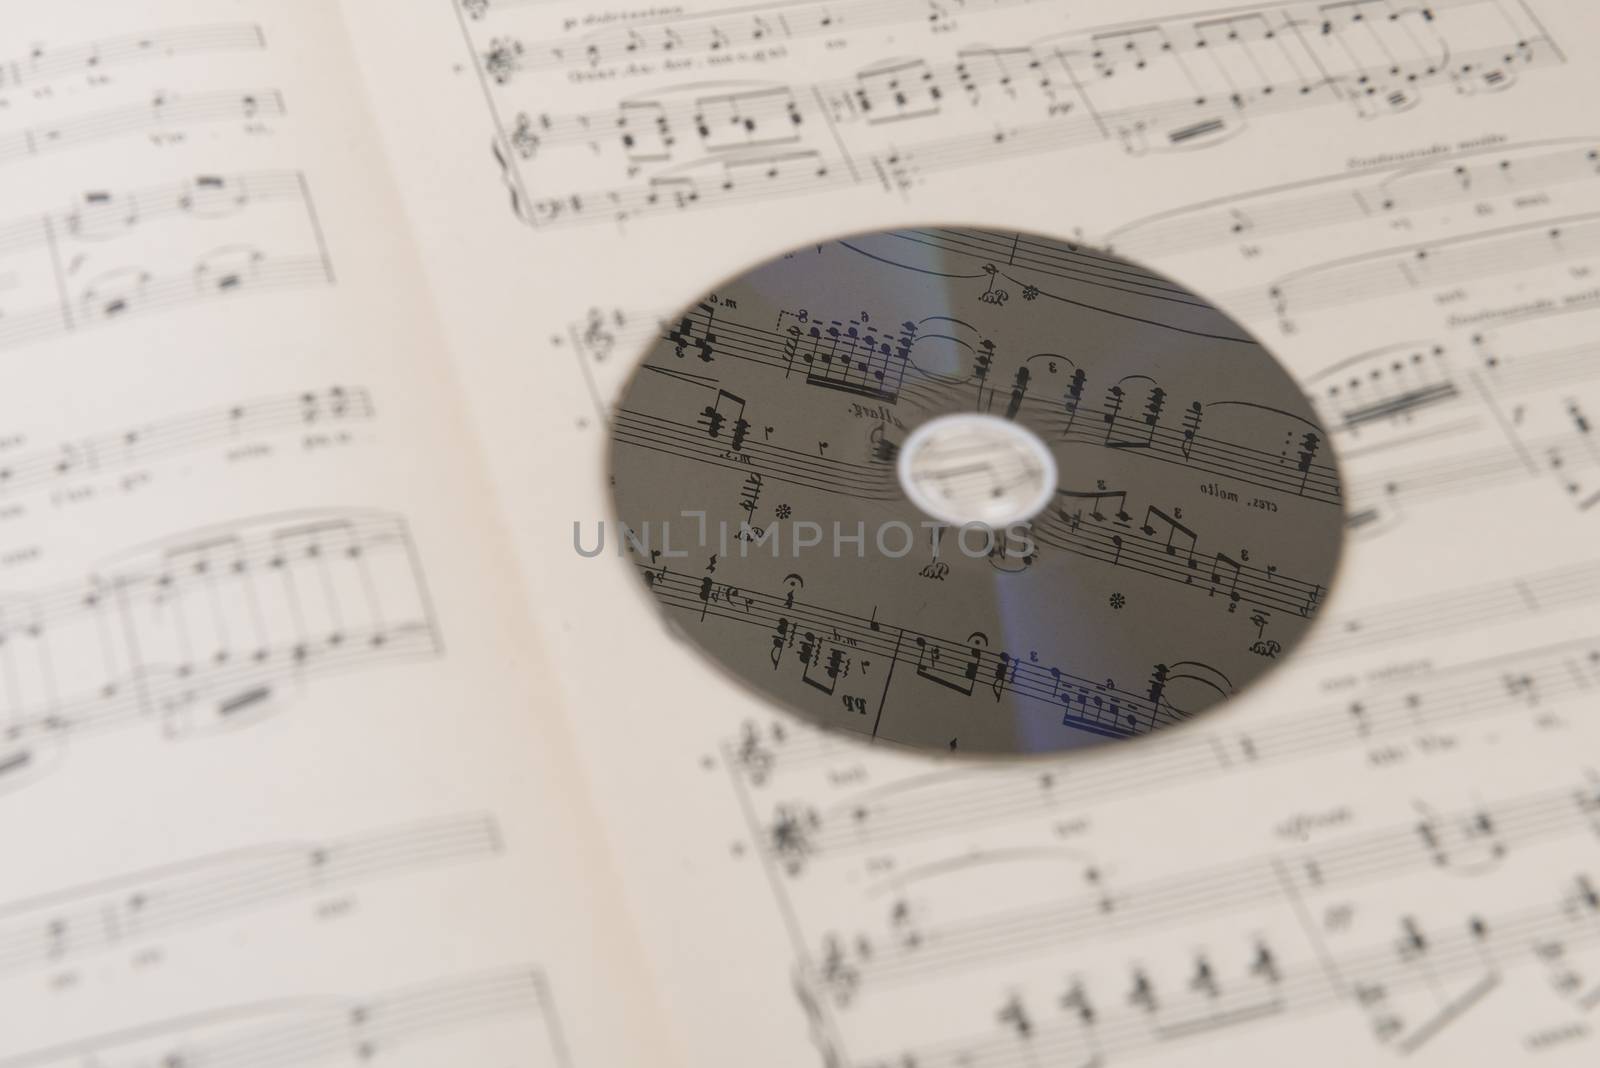 A page of a musical score with a CD on hand